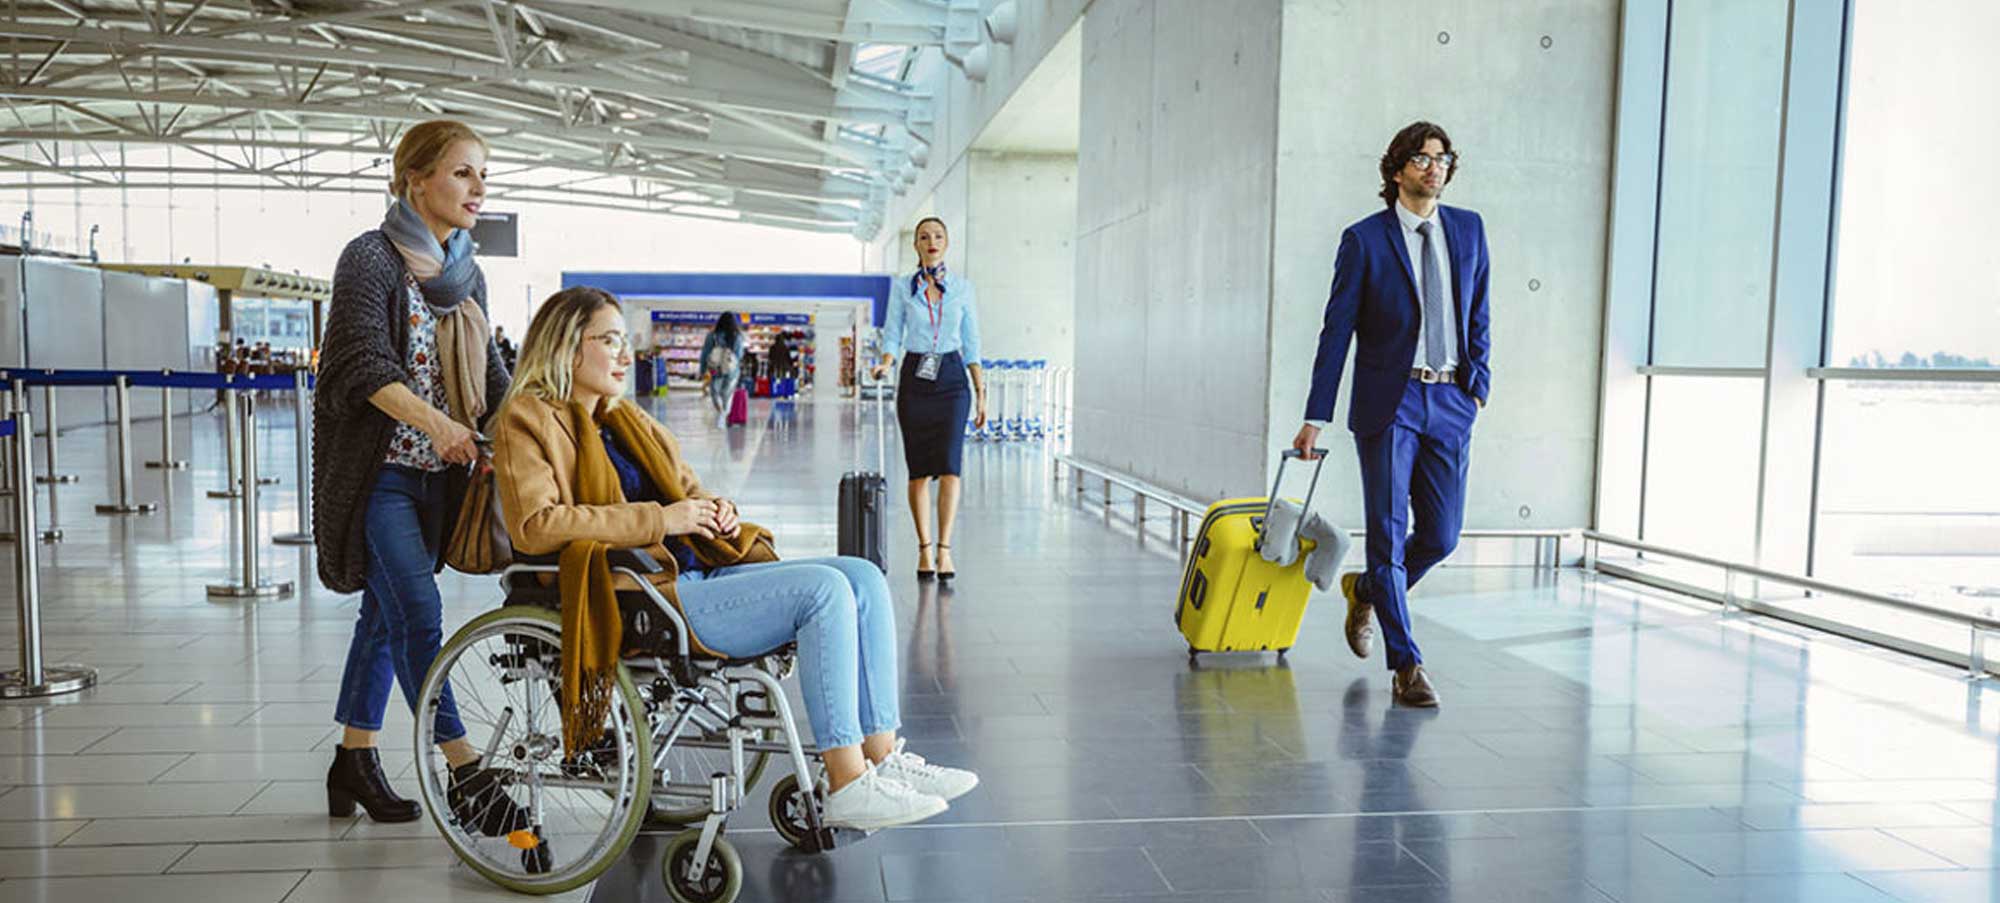 Young woman being pushed in a wheelchair in an airport